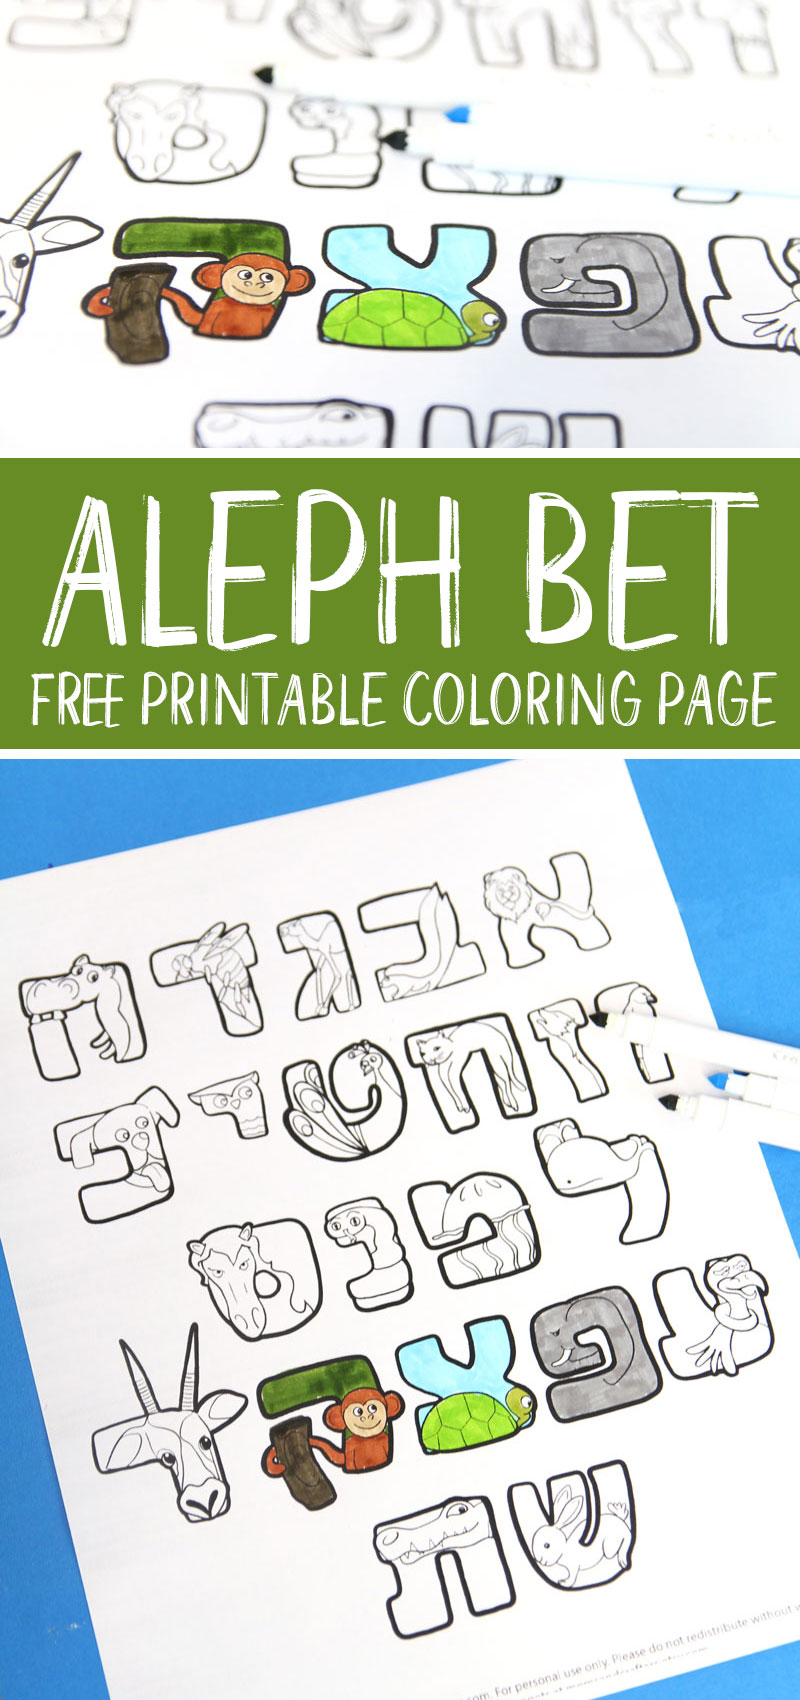 19+ Aleph Bet Coloring Sheets